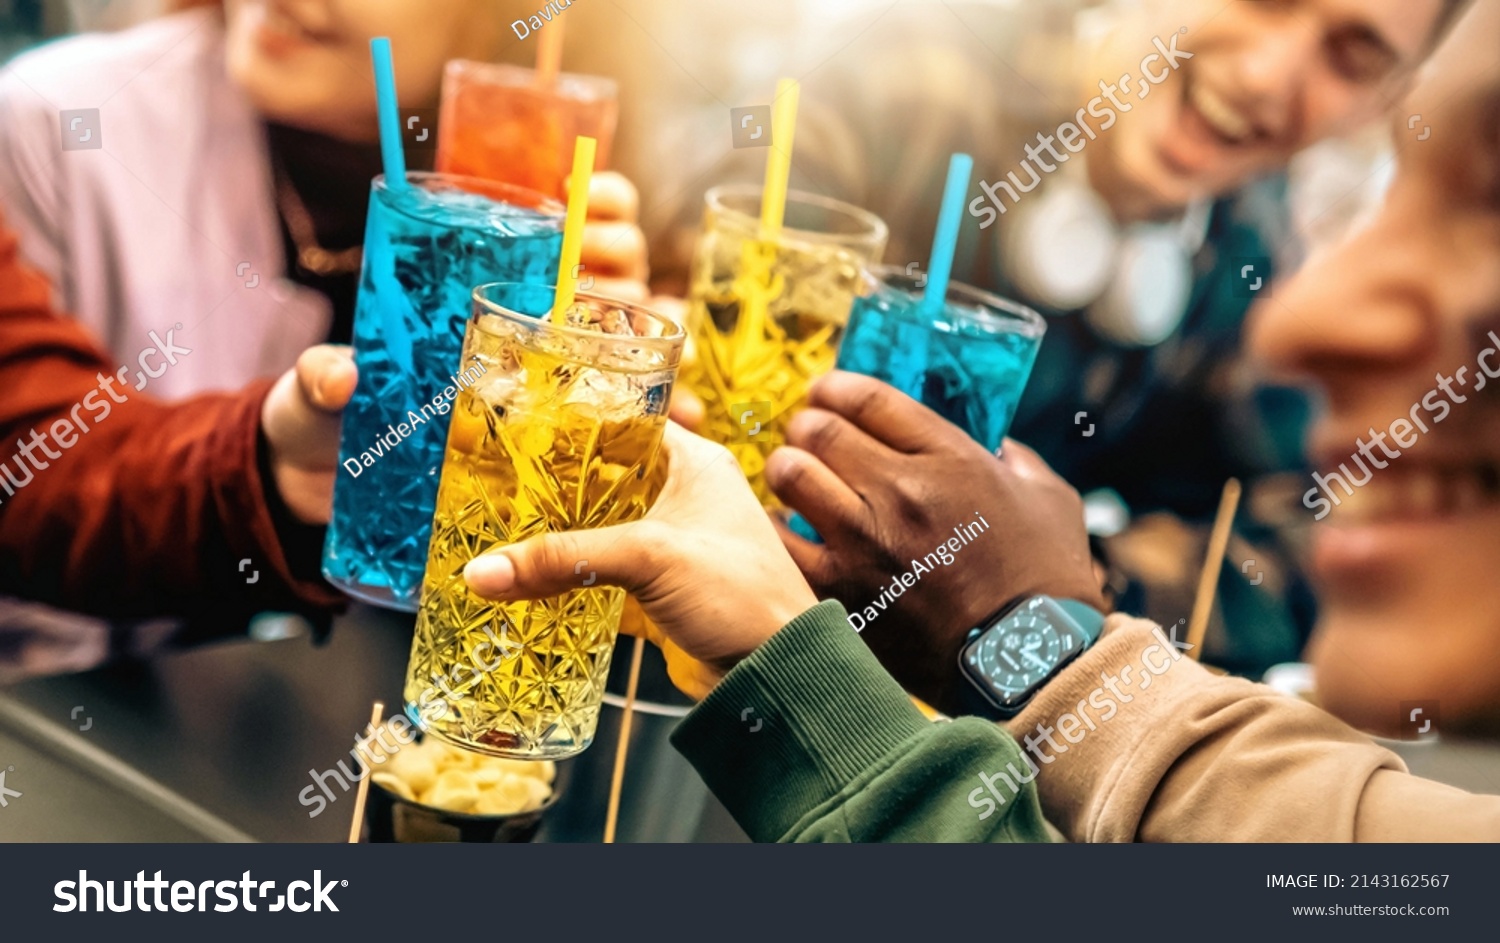 Group of friends cheering drinks glasses together - Young people enjoying happy hour at cocktail open bar - Beverage lifestyle concept #2143162567